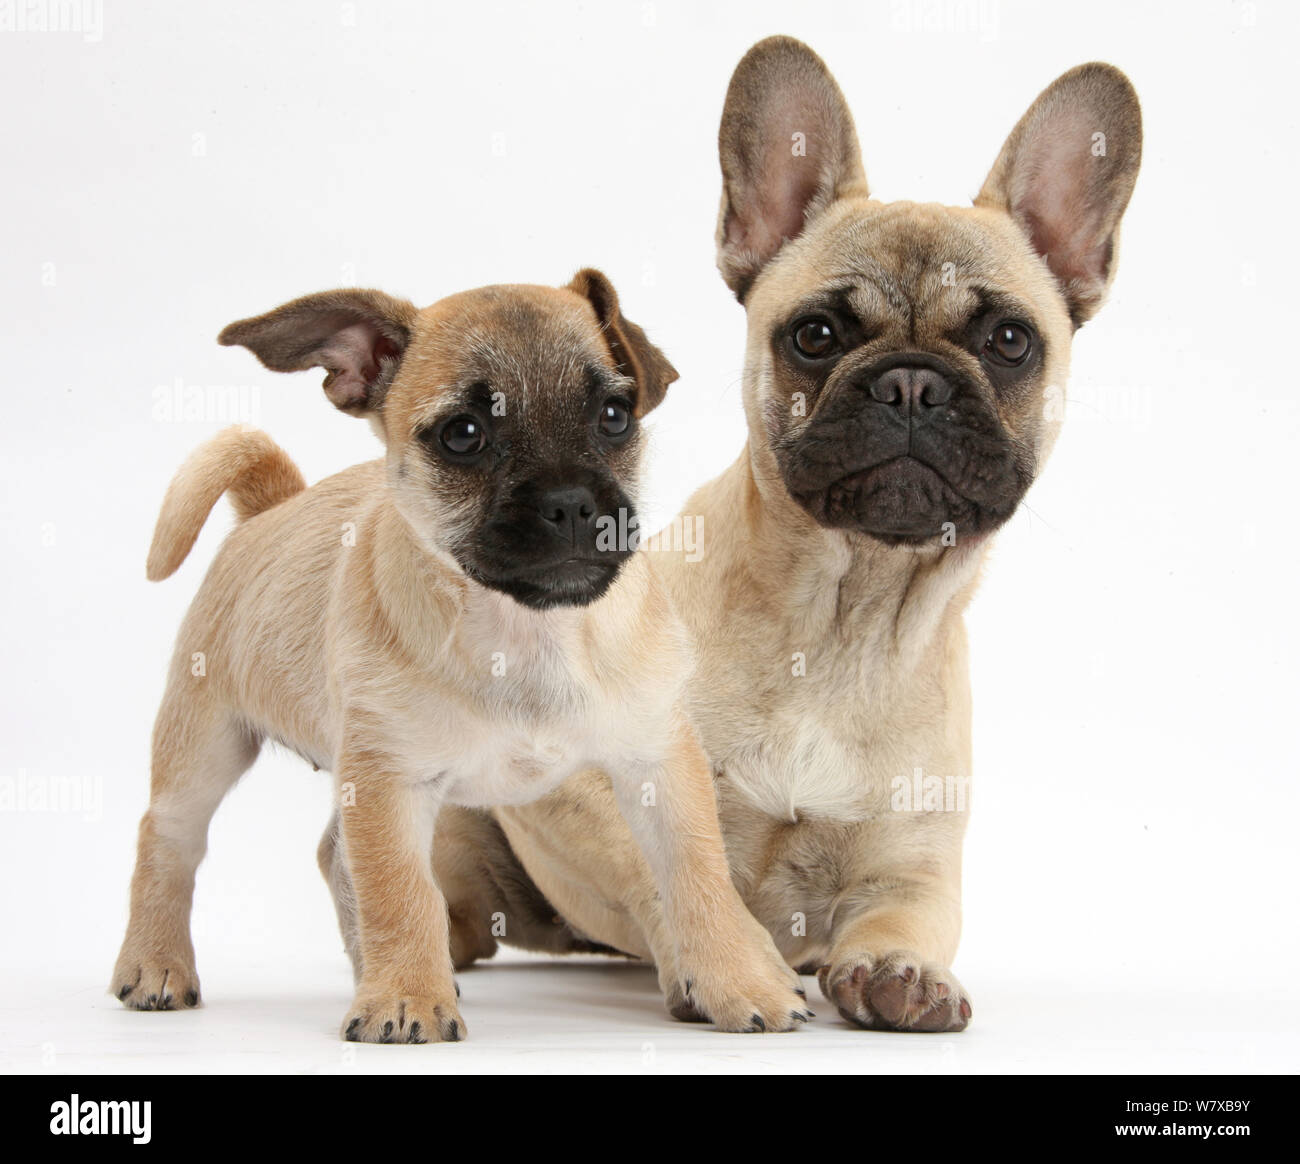 Pug x Jack Russell Terrier 'Jug' puppy, age 9 weeks, and French Bulldog Stock Photo